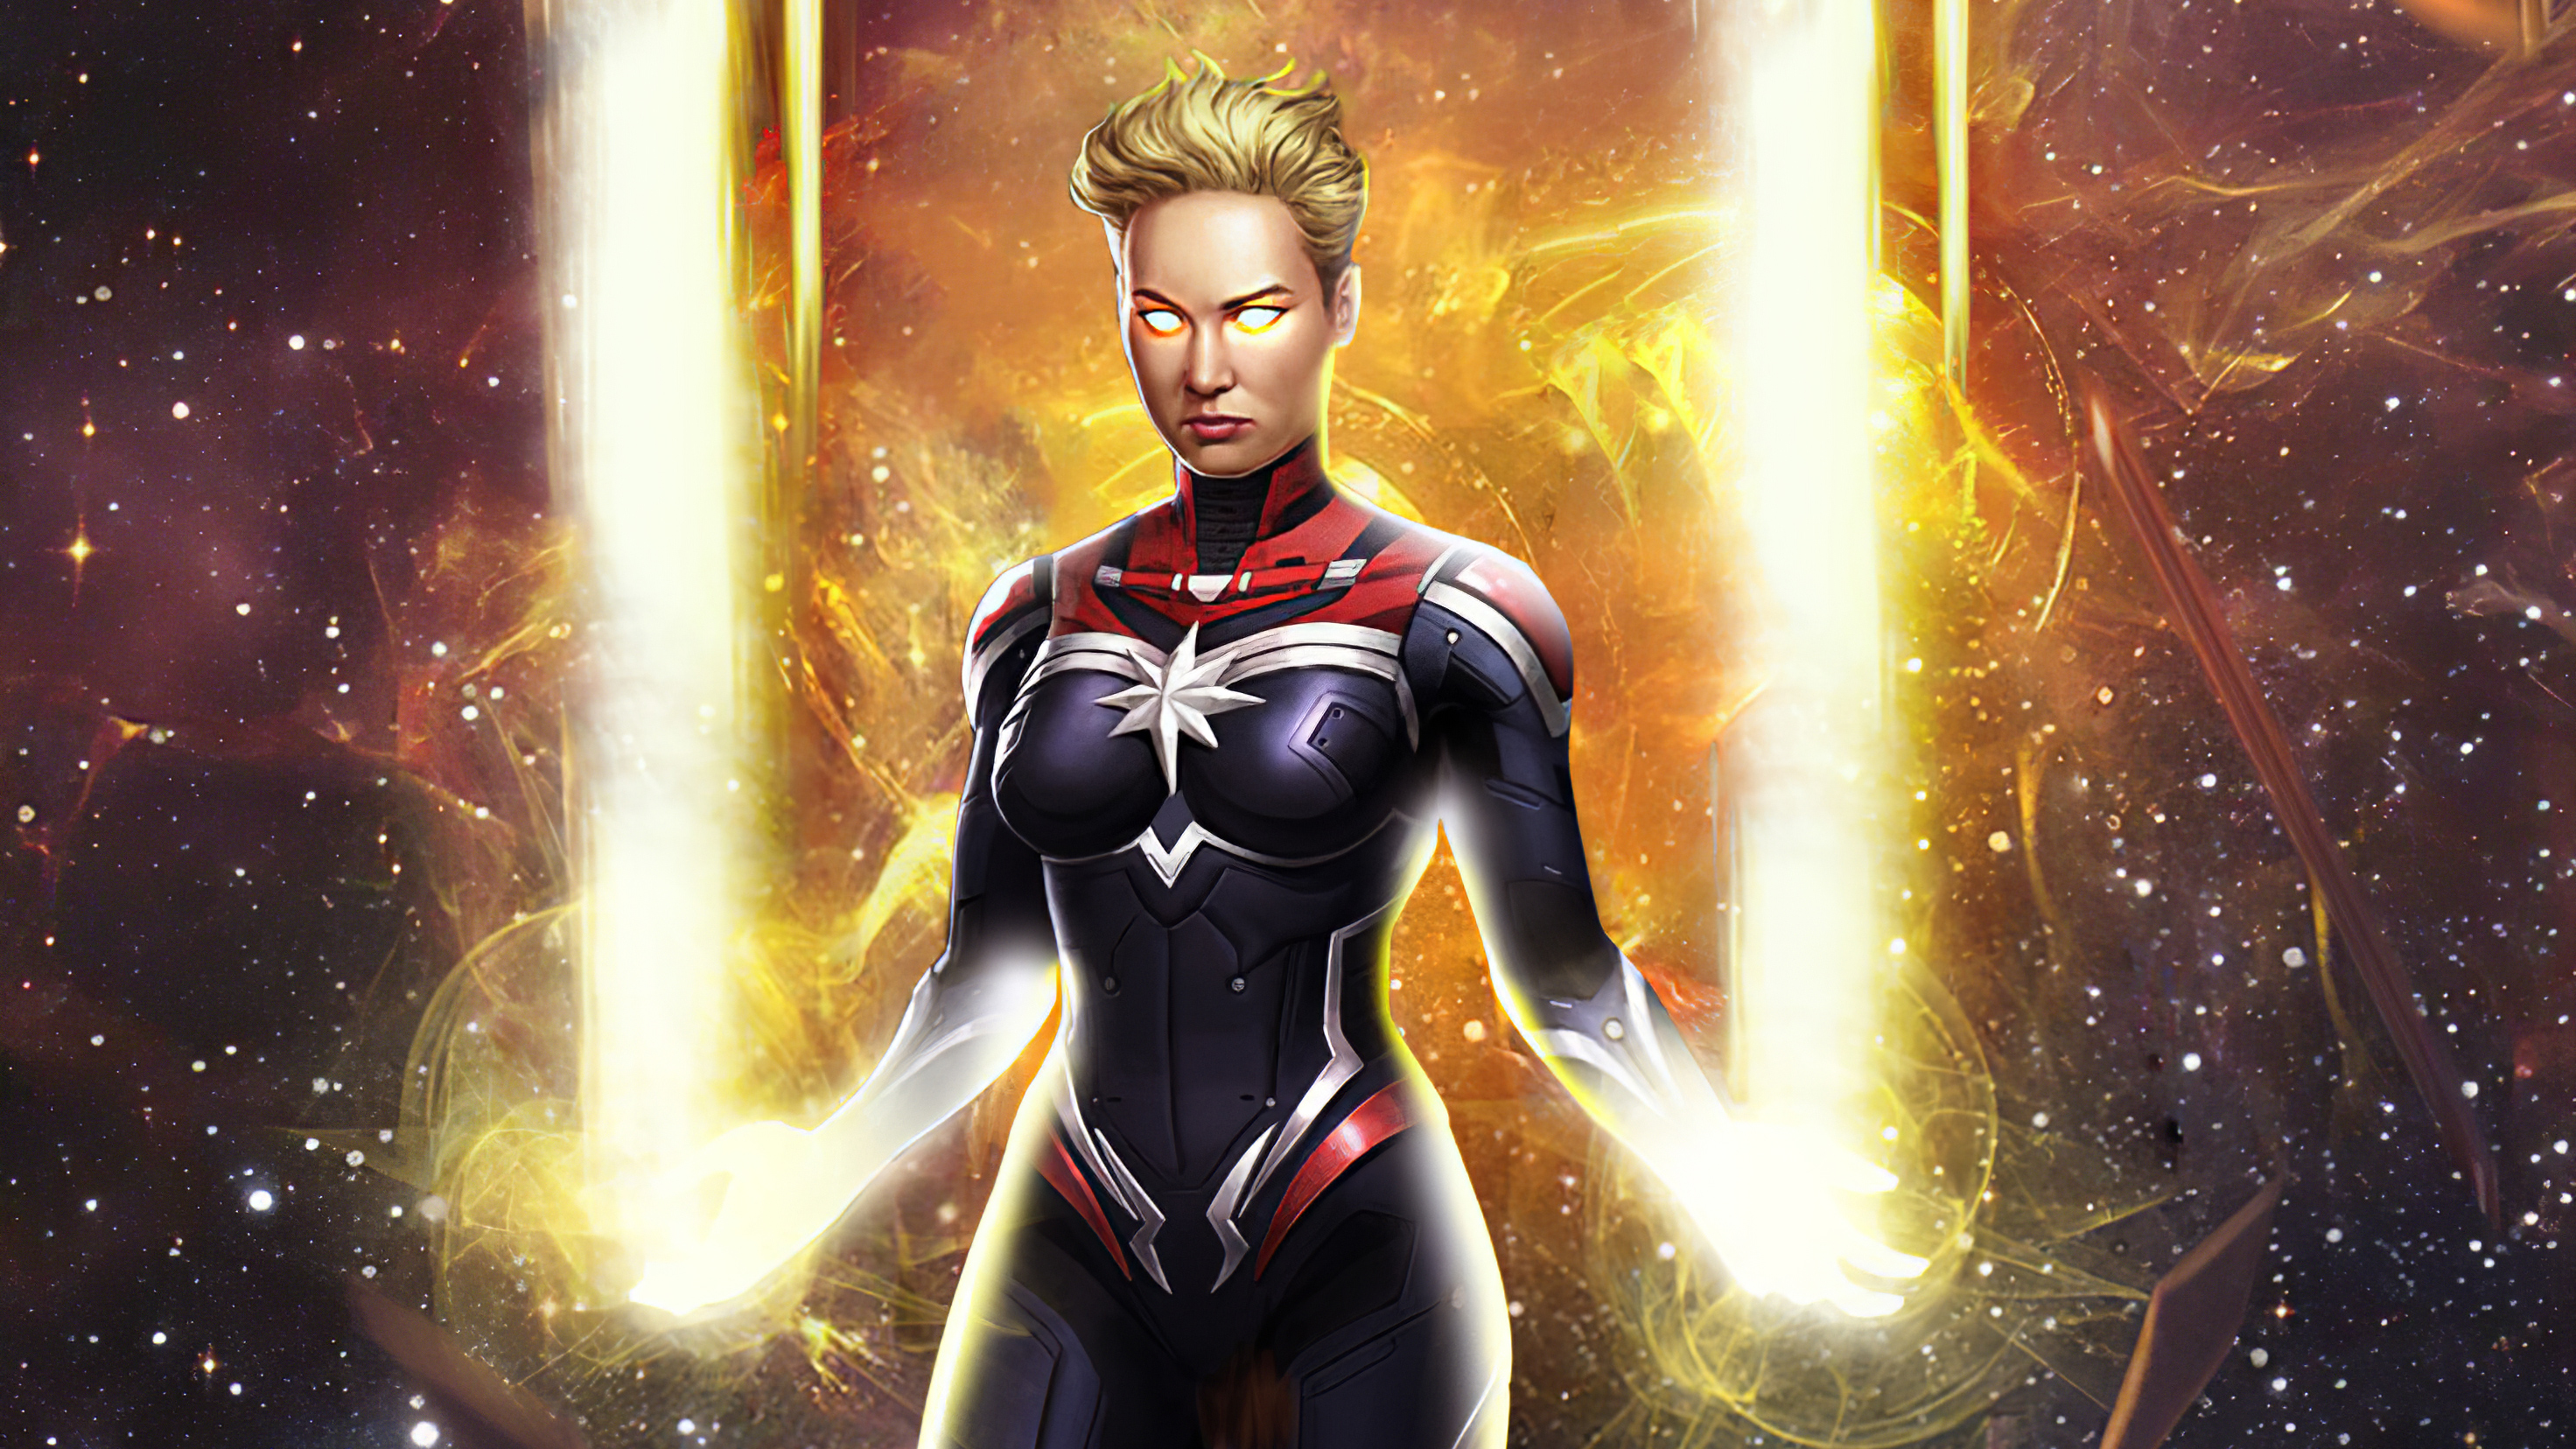 Captain Marvel for windows download free